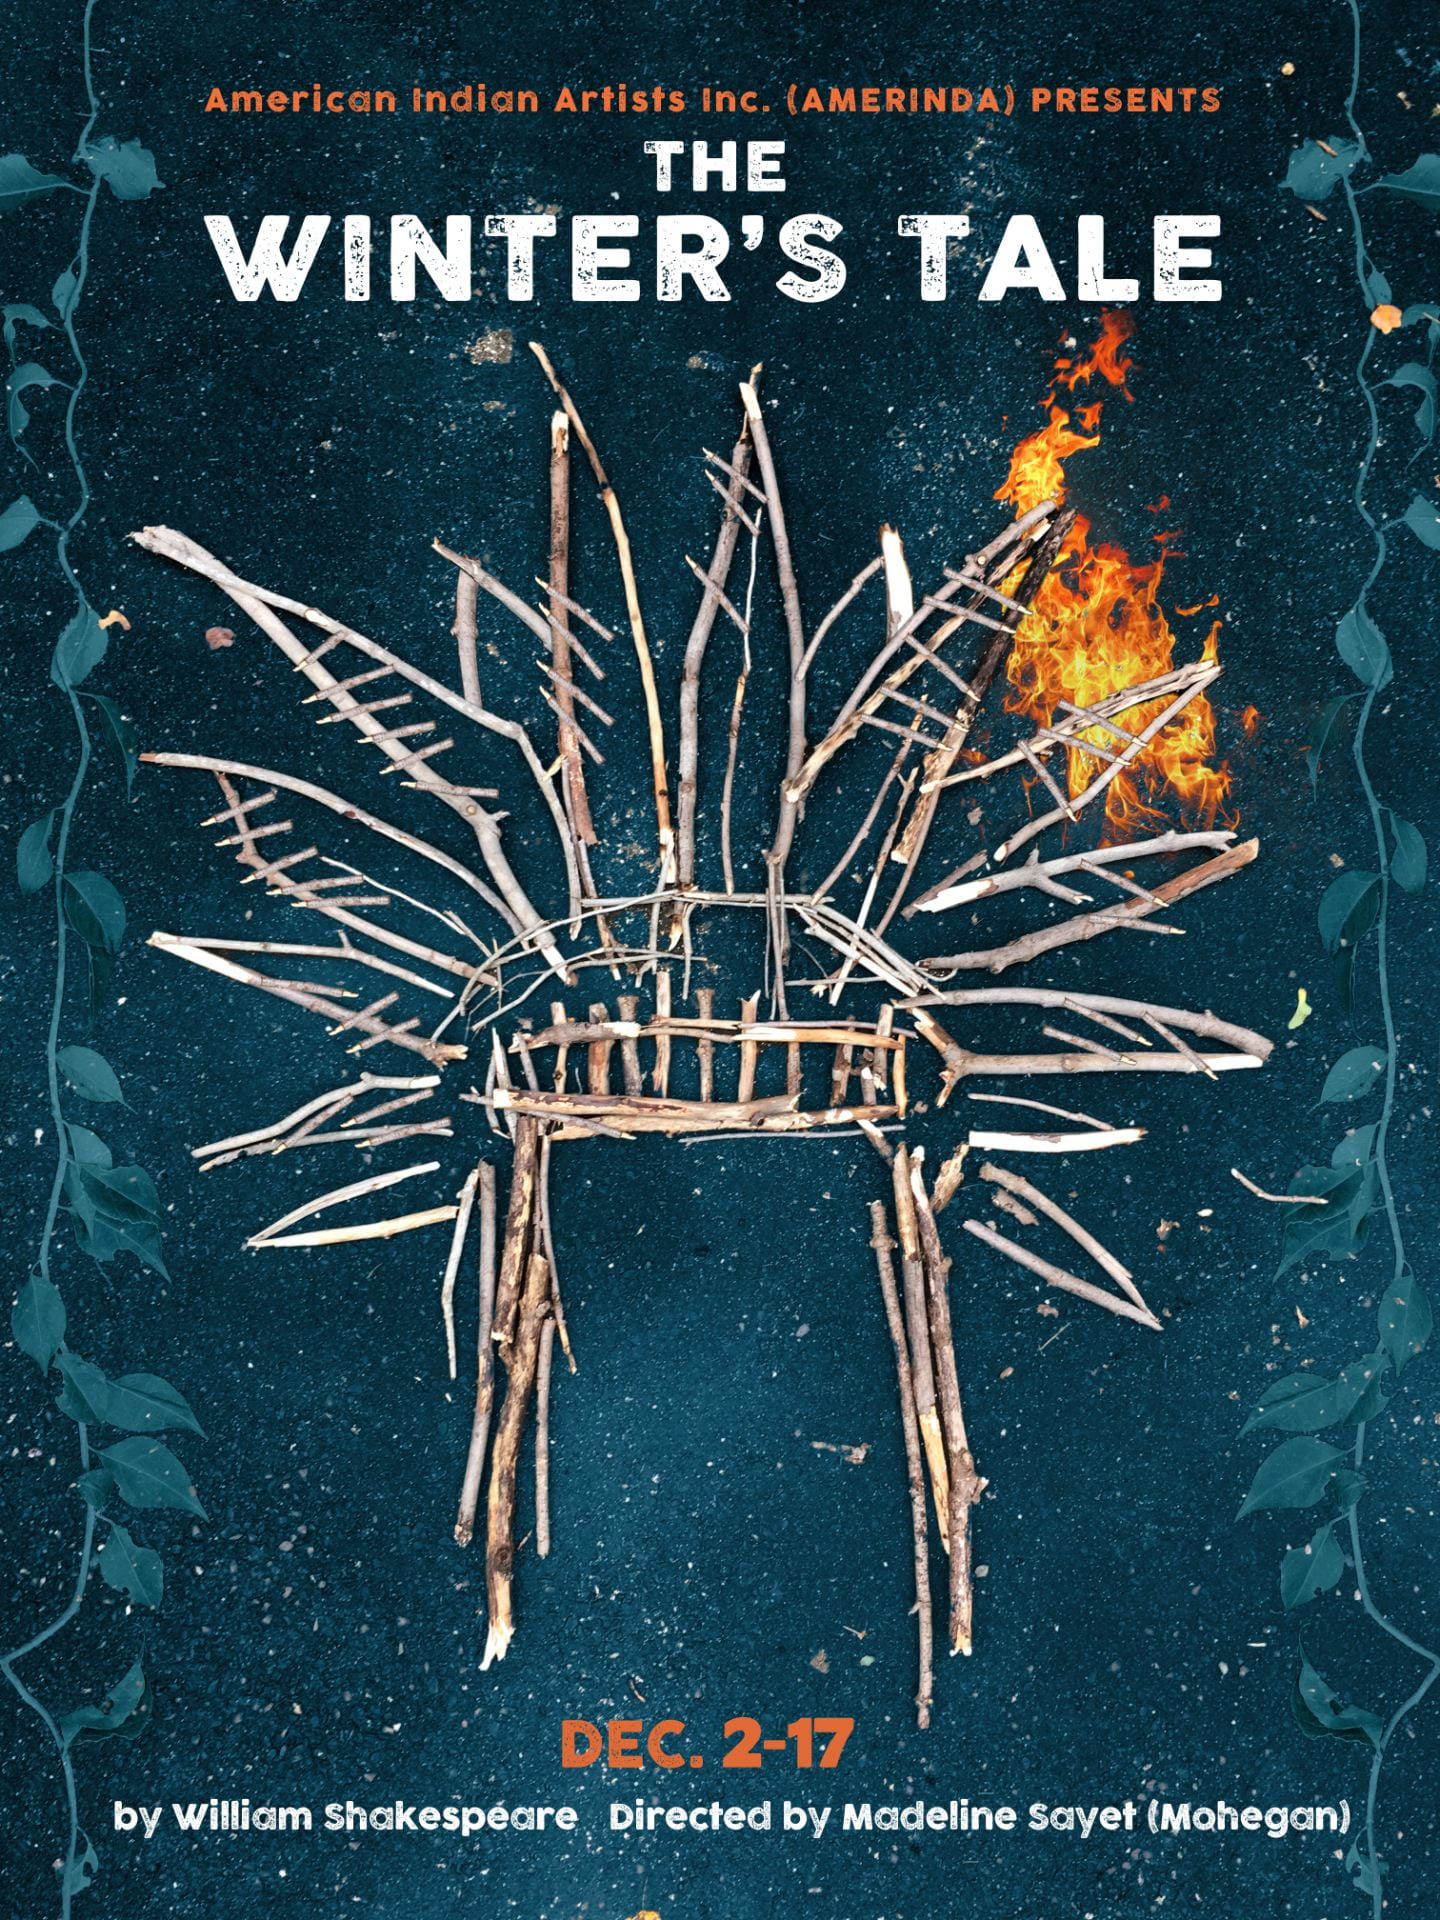 The promotional poster for Amerinda, INC.'s adaptation of The Winter's Tale. Written by William Shakespeare and directed by Madeline Sayet.